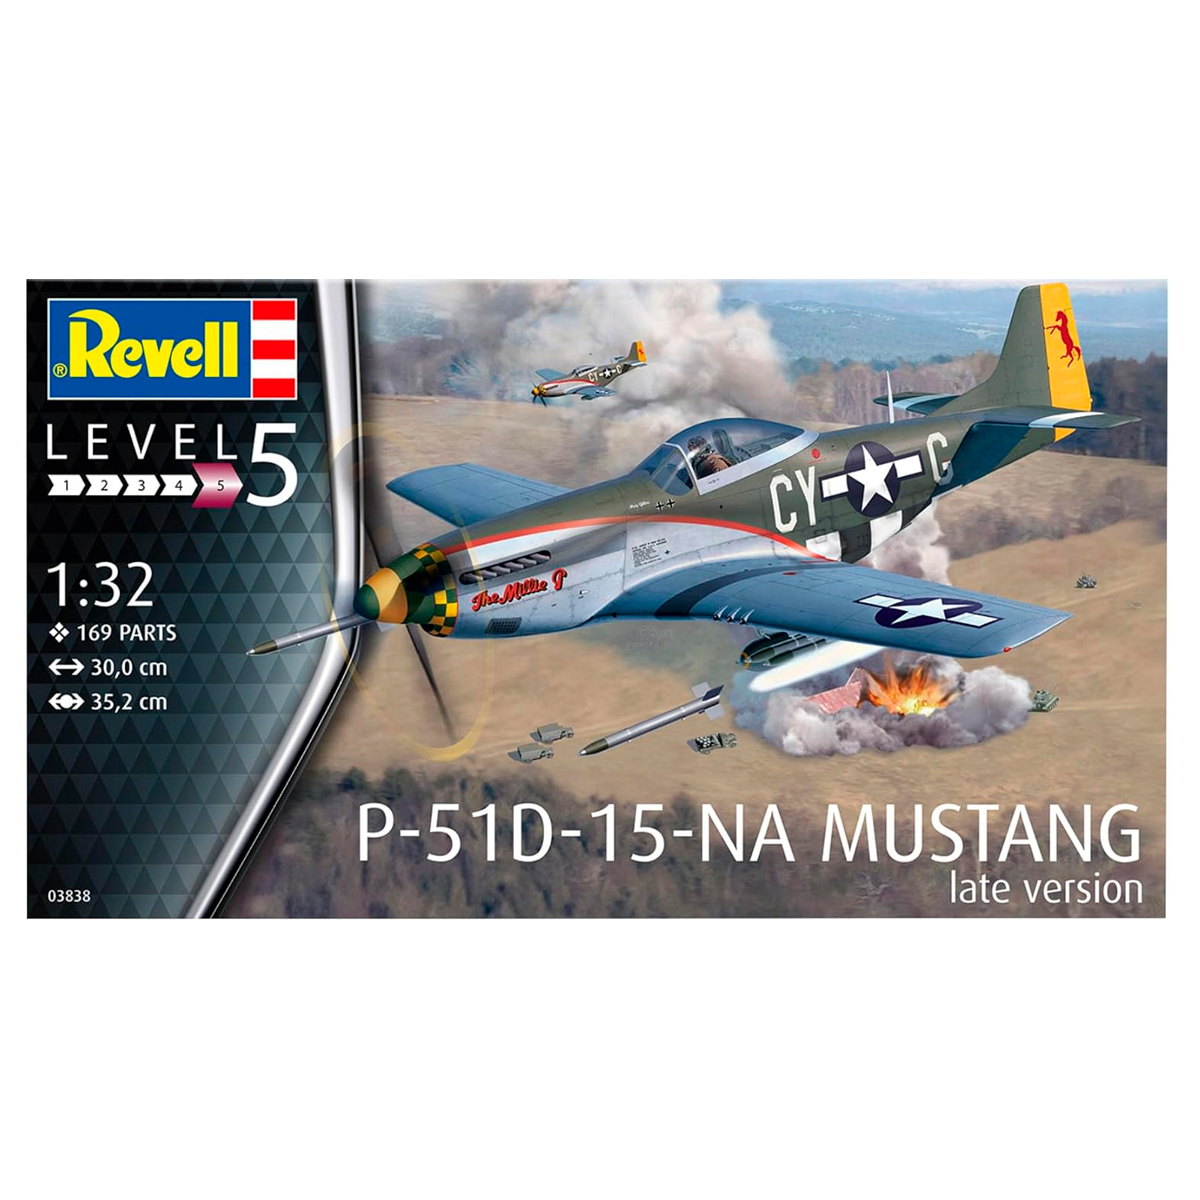 P-51D-15-NA MUSTANG late version 1/32